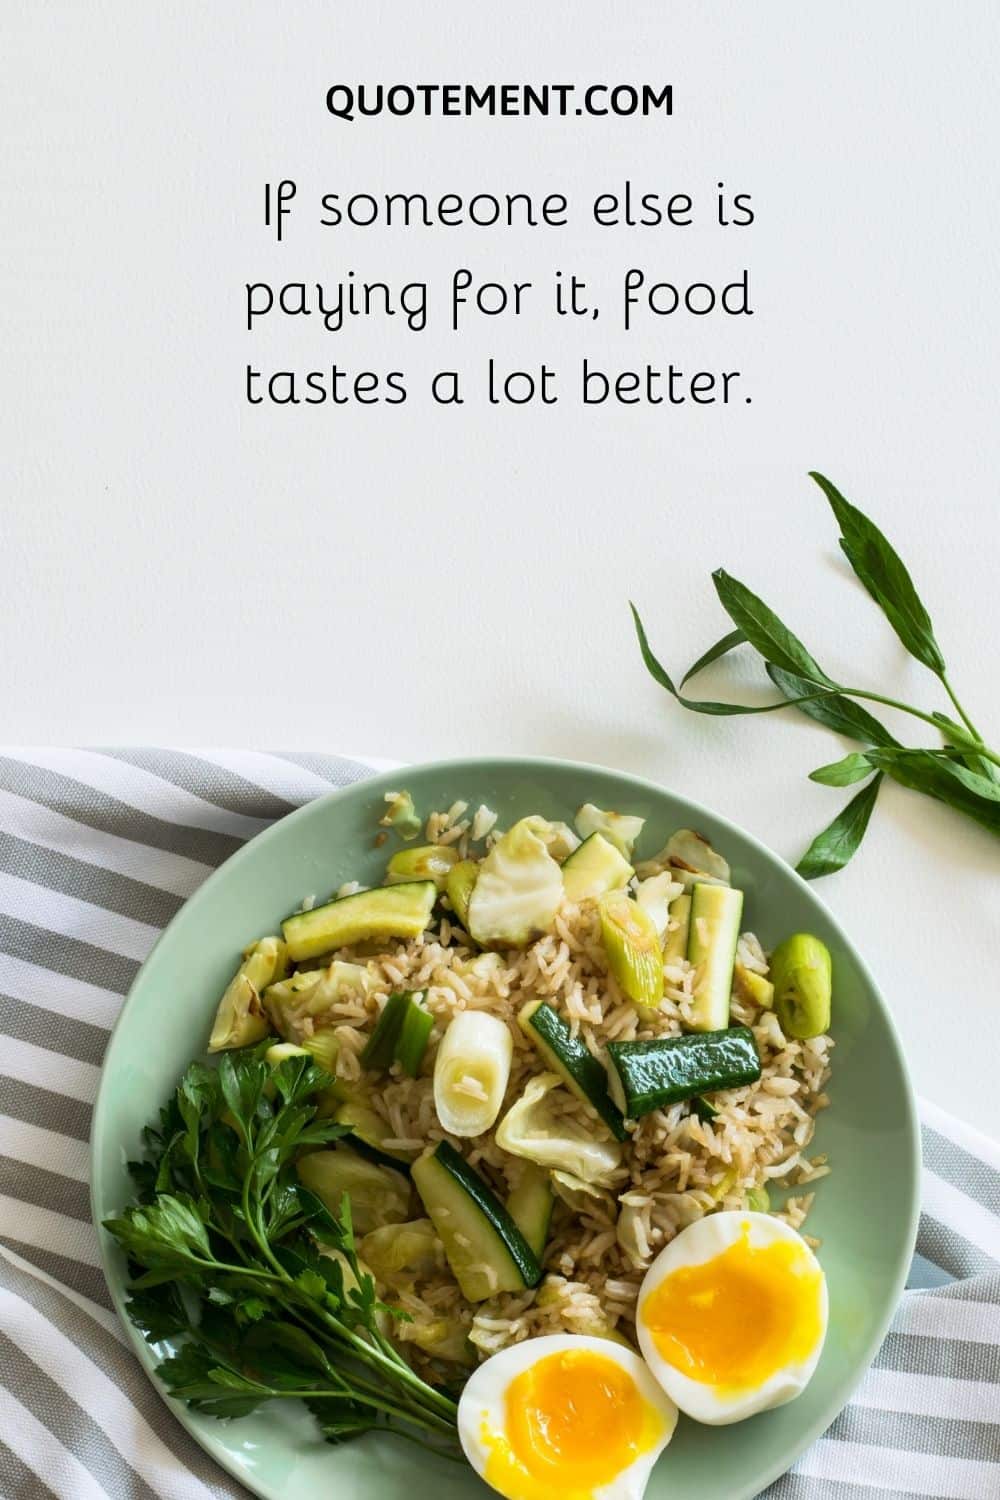 If someone else is paying for it, food tastes a lot better